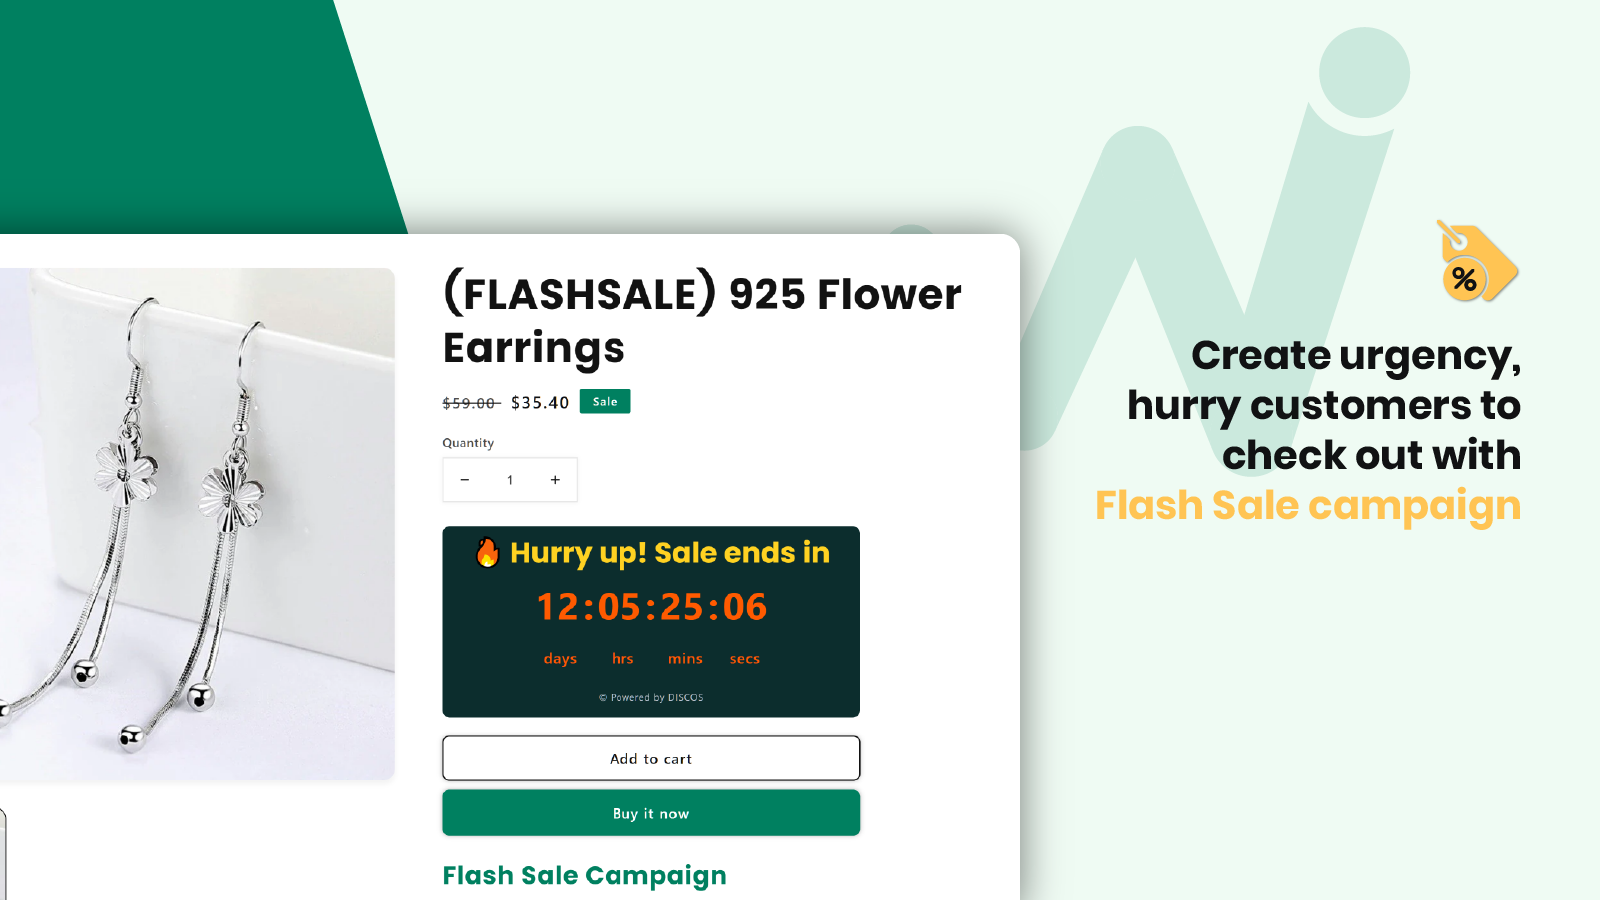  create urgency with flash sale discount and countdown timer